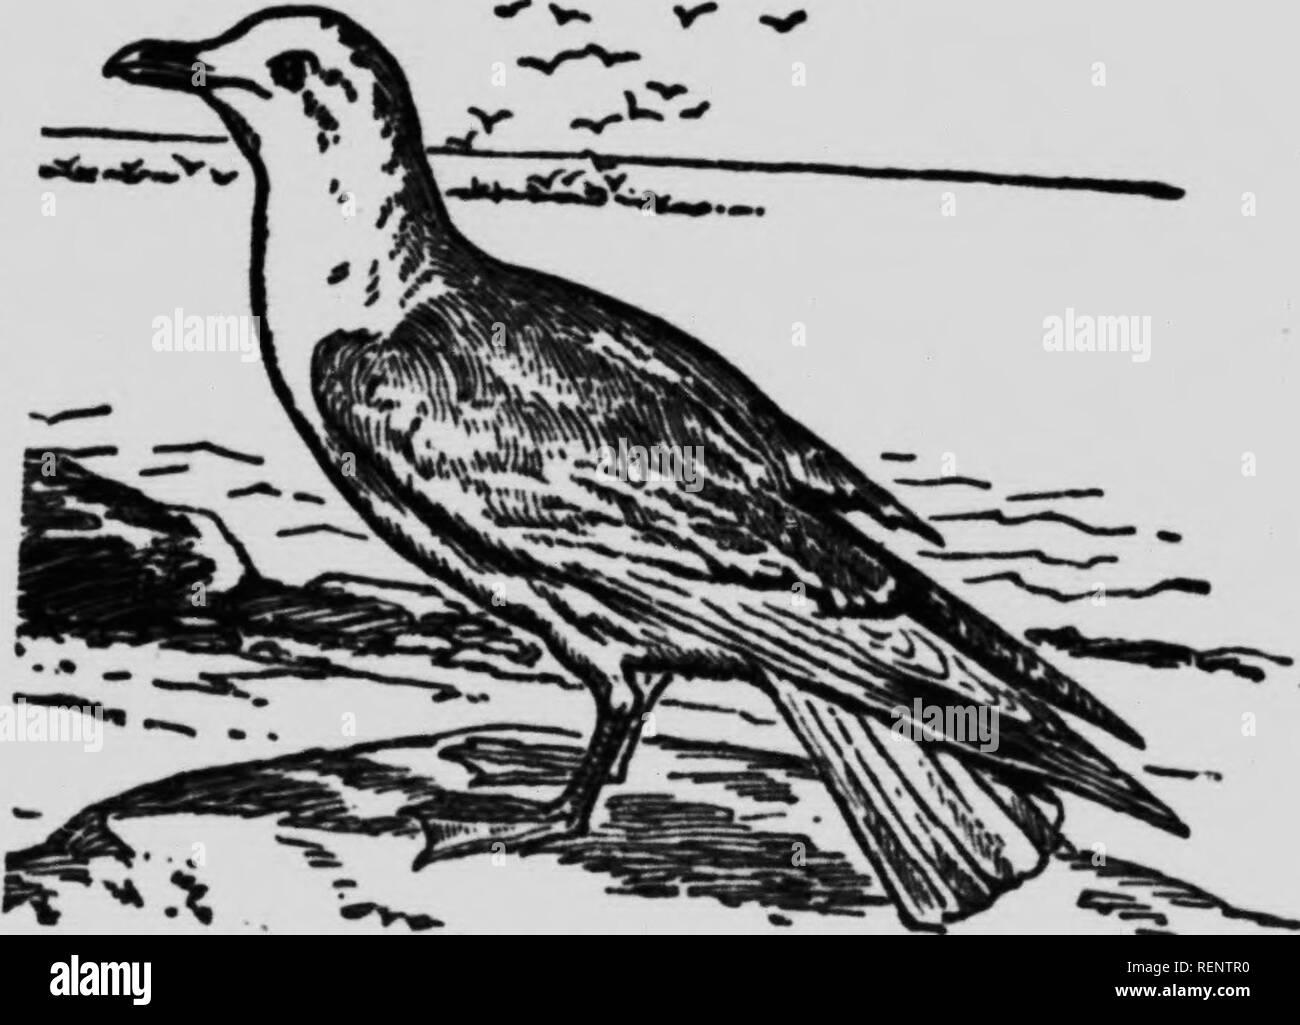 . ZoÃ¶logy [microform] : descriptive and practical. Zoology; Zoologie. V*- V Fig. 132. The Loon. From Eckstormi Tkt Bird Bock. The penguins are correspondingly characteri&lt;;f.V ^f p . gonia and the Antarctic regions Thpt ^^^â and paddlelike, and ''' &quot;&quot;'&quot;^^ &quot;&quot;'^ ^'&quot;^^ are covered with scale- like feathers. The Long-winged Swimmers.âThis group includes the gulls and terns. They are web-footed and have long wings and tail, with remarkable power of flight. They occasionally rest upon the water, coming on shore only to lay their cp-p-q tk^.. Fig. 133. Herring Gull. F Stock Photo